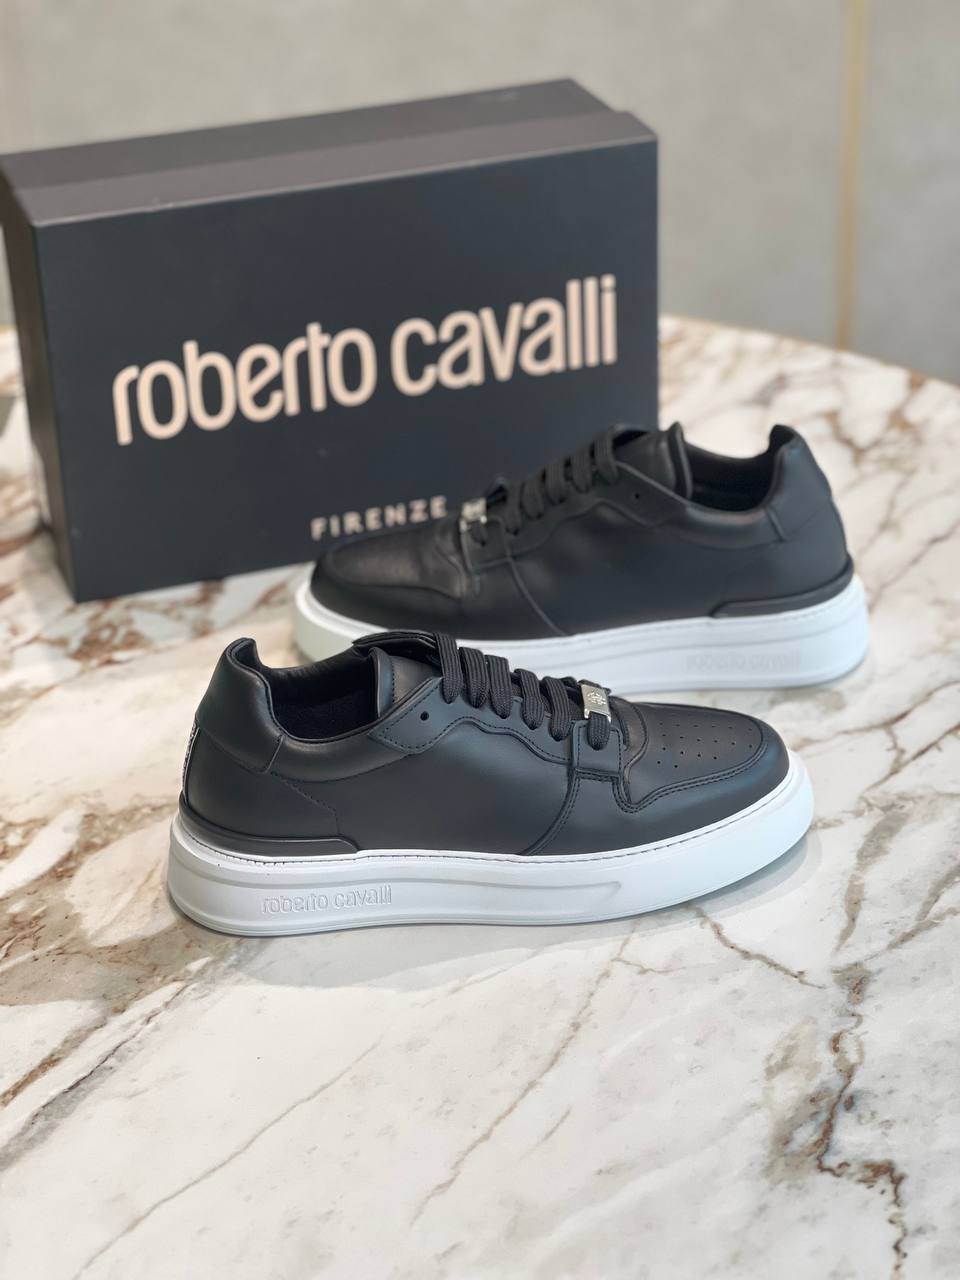 Roberto Cavalli Outlets 6147